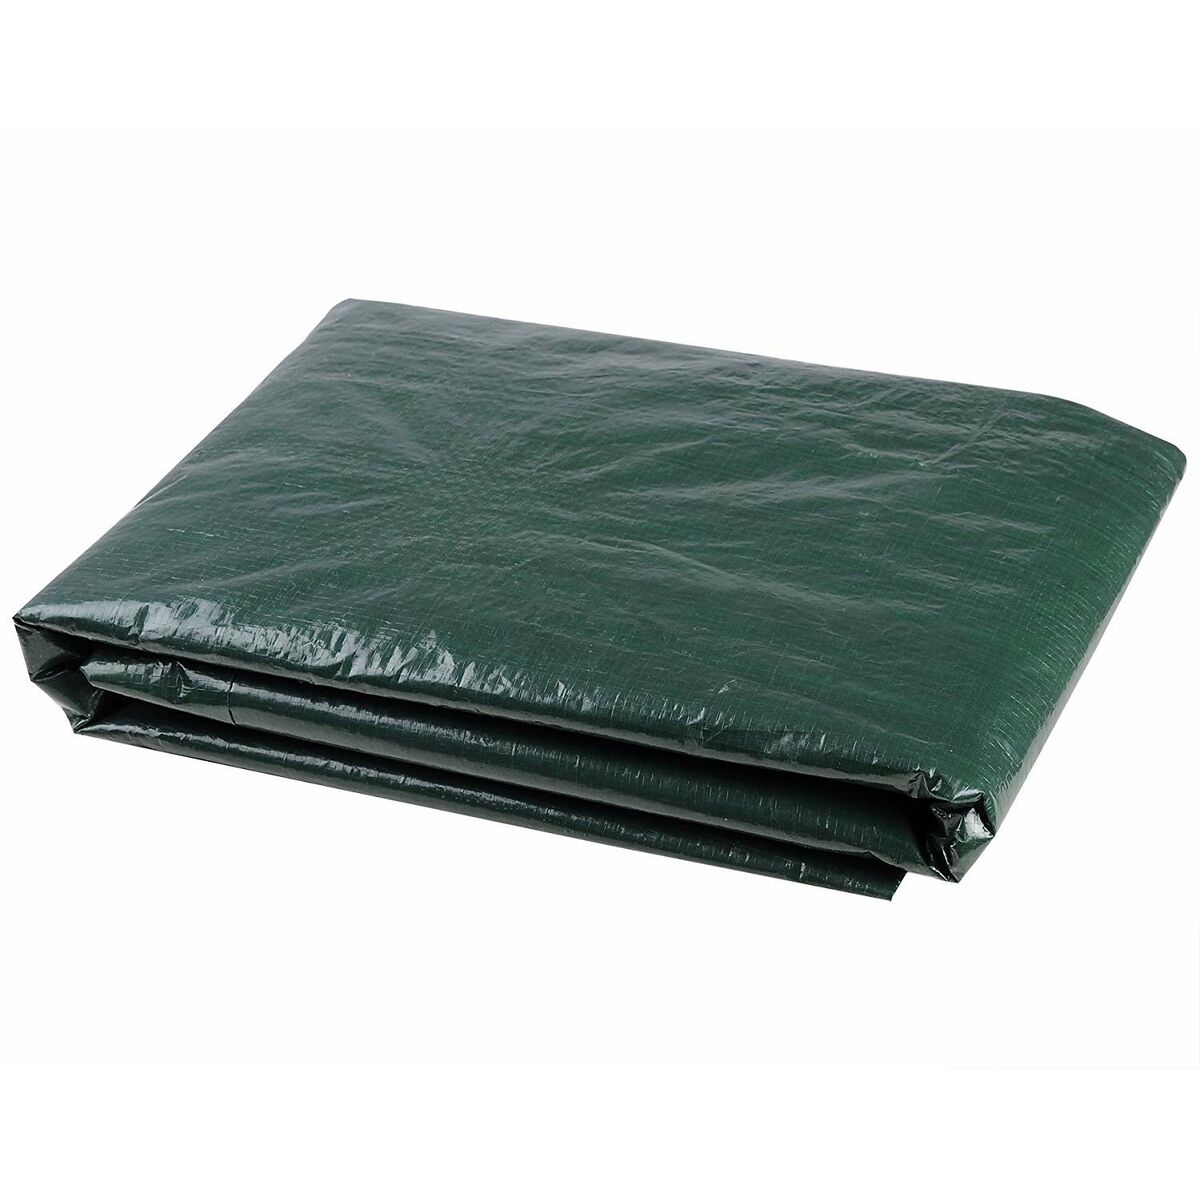 Protective Cover for Barbecue Altadex Green Polyethylene 103 x 58 x 58 cm